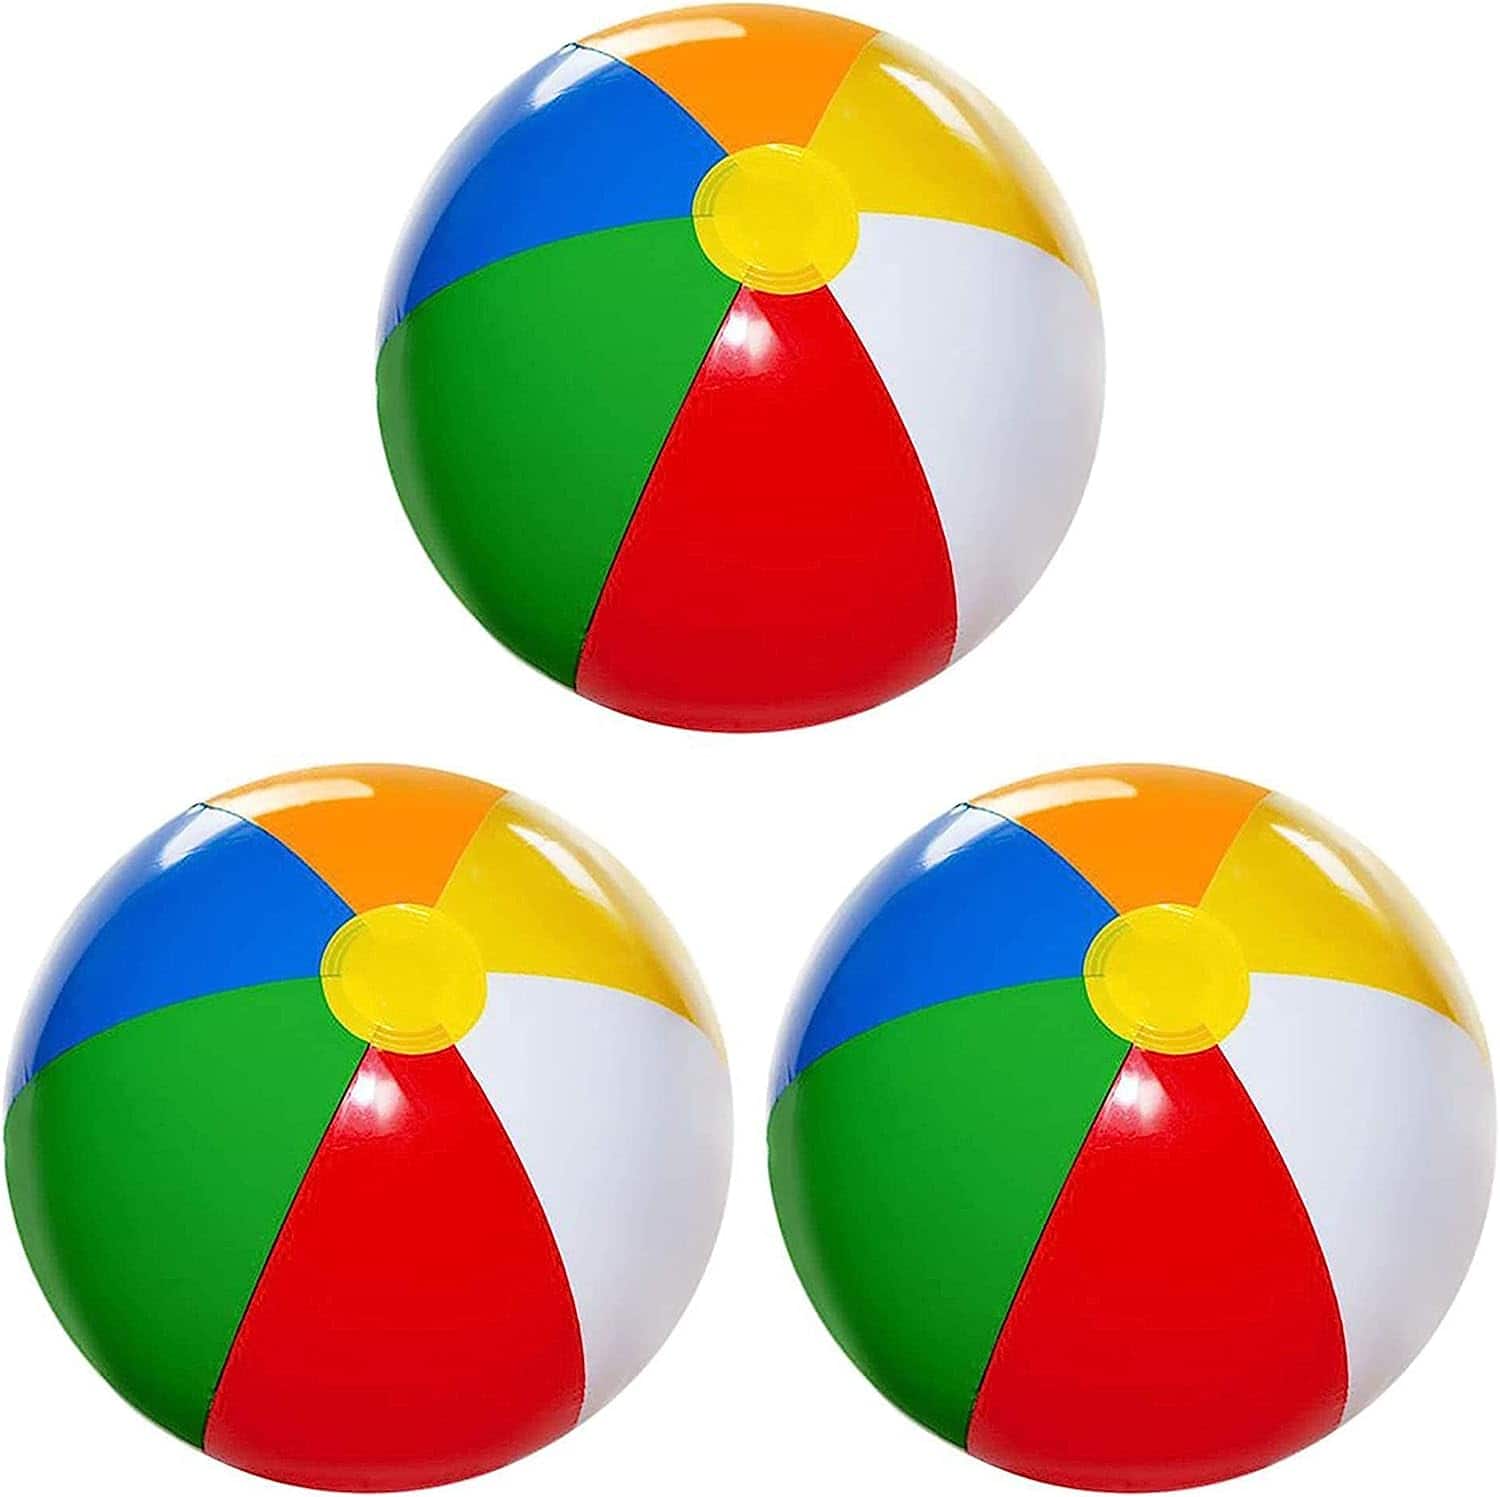 Colorful inflatable beach balls